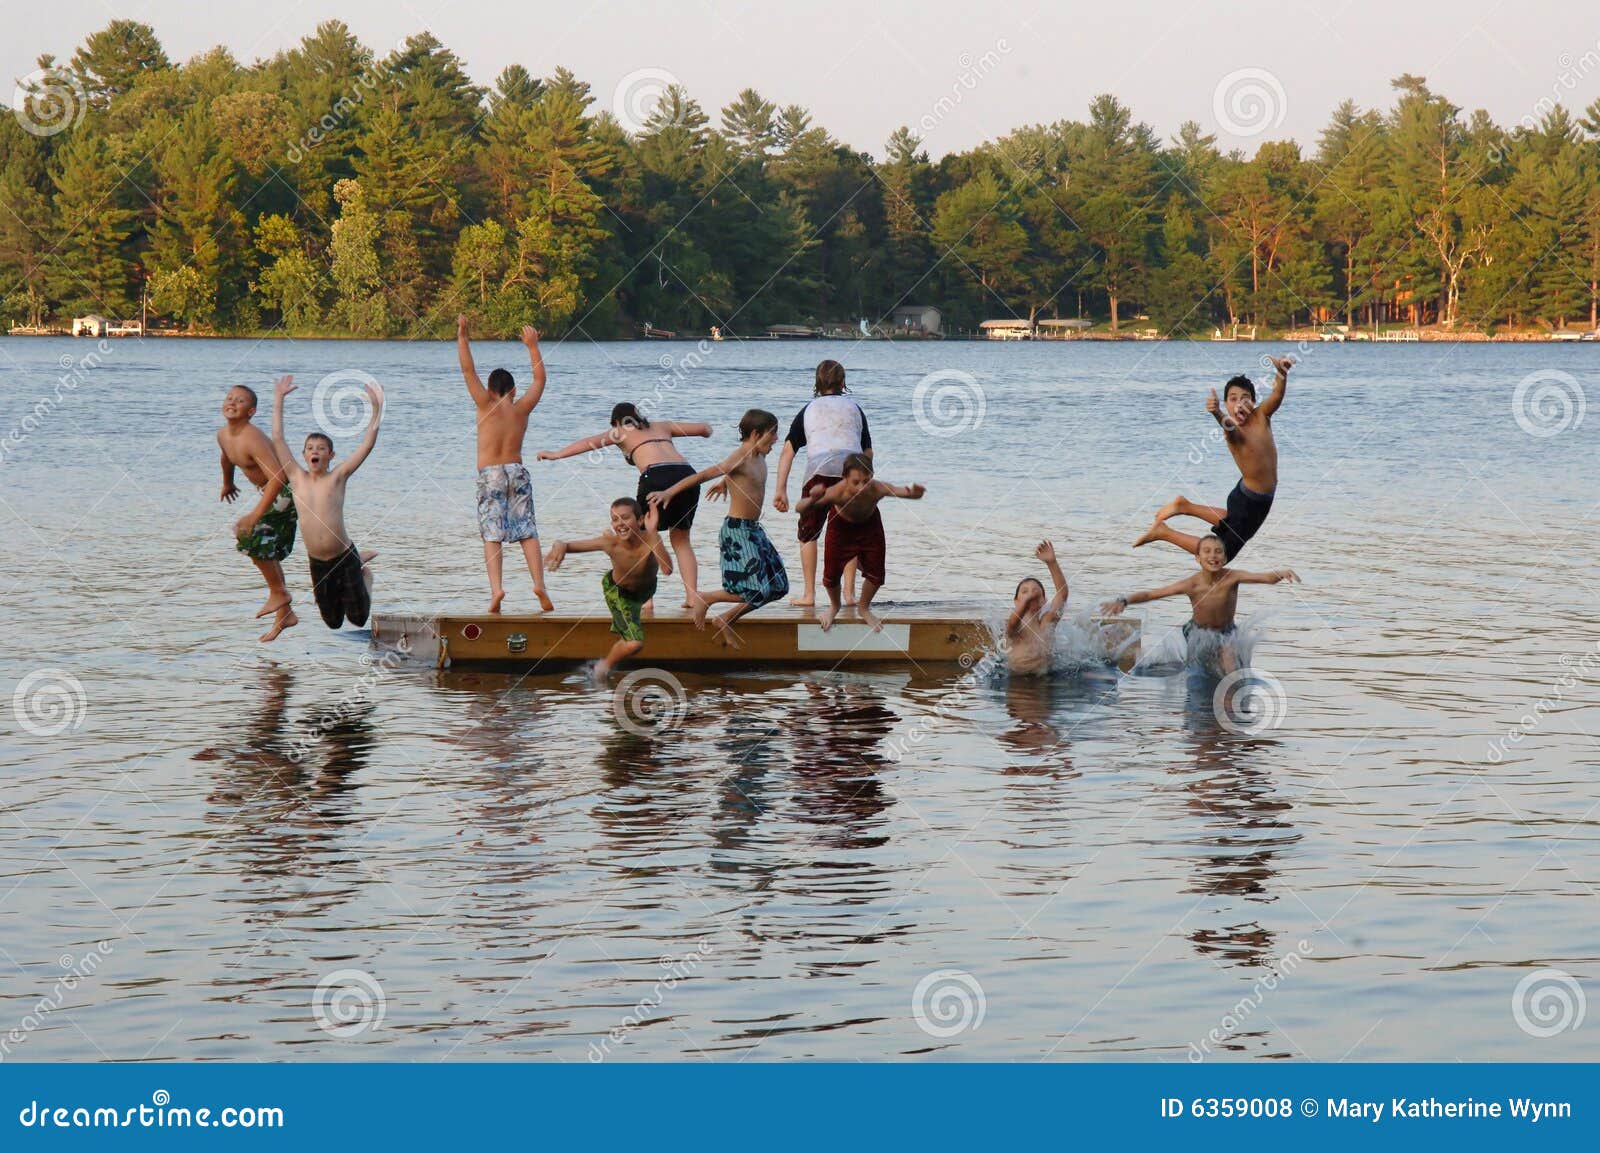 group of kids jumping into lake